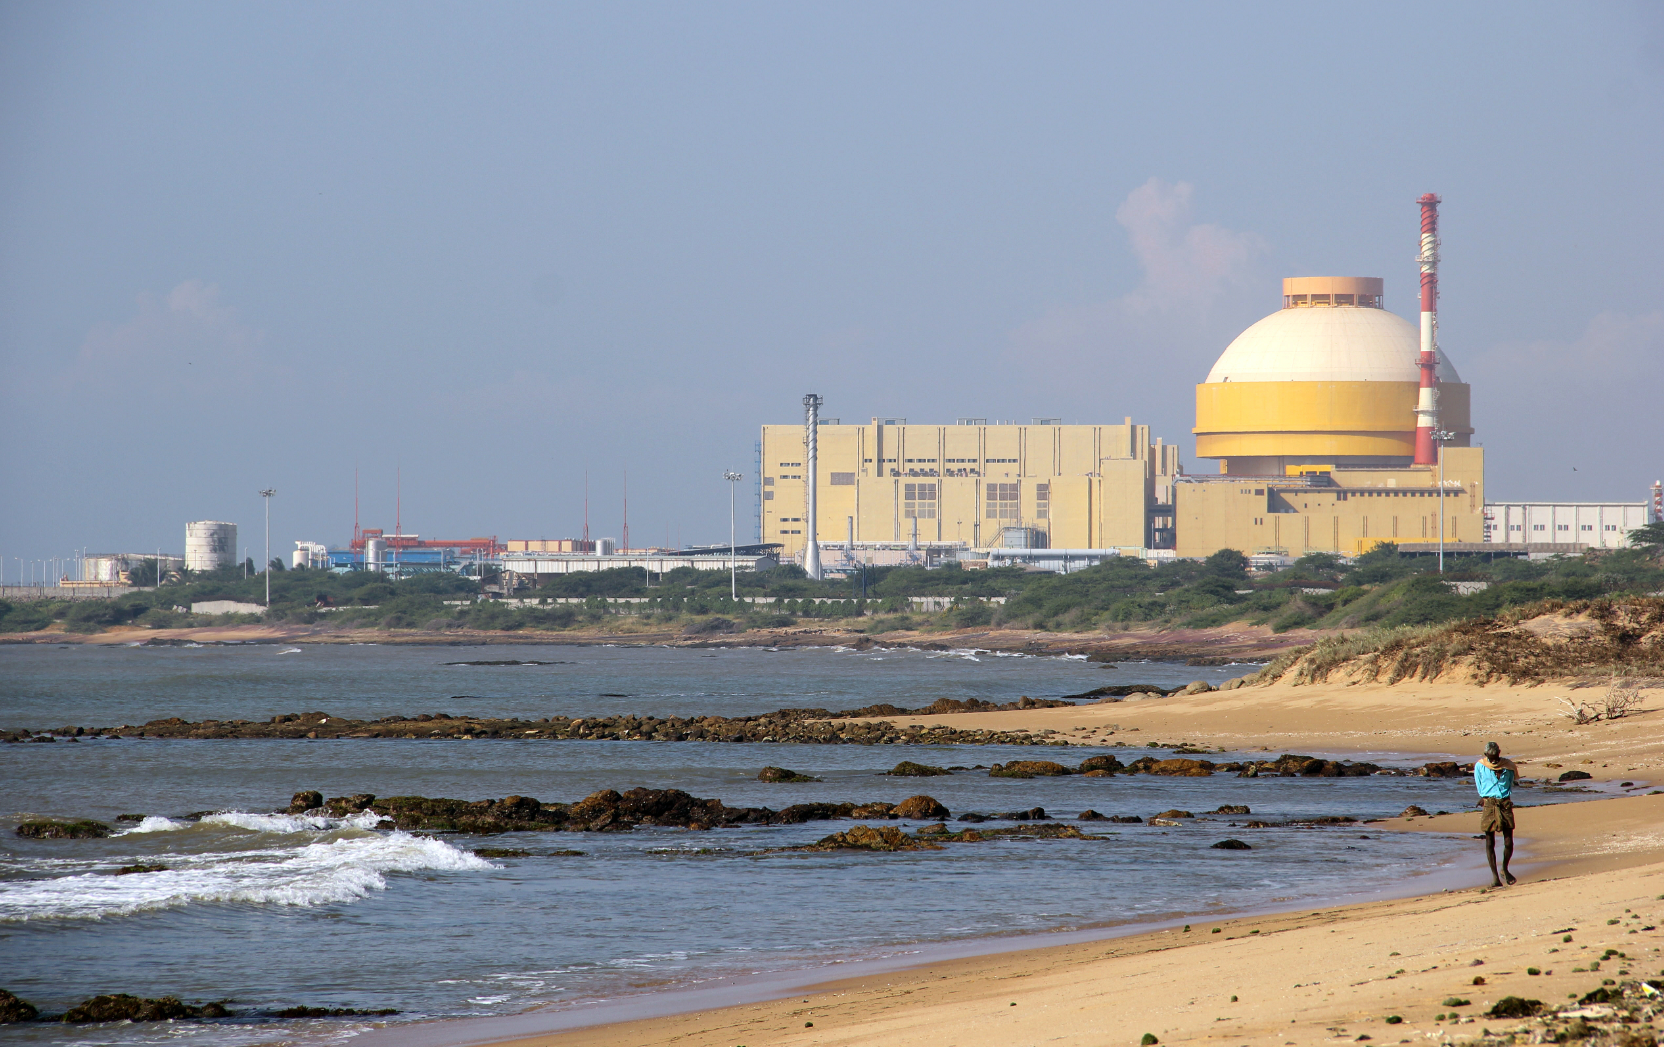 Roastom constructed the Kudankulam nuclear power plant, which is now being operated by NPCIL.